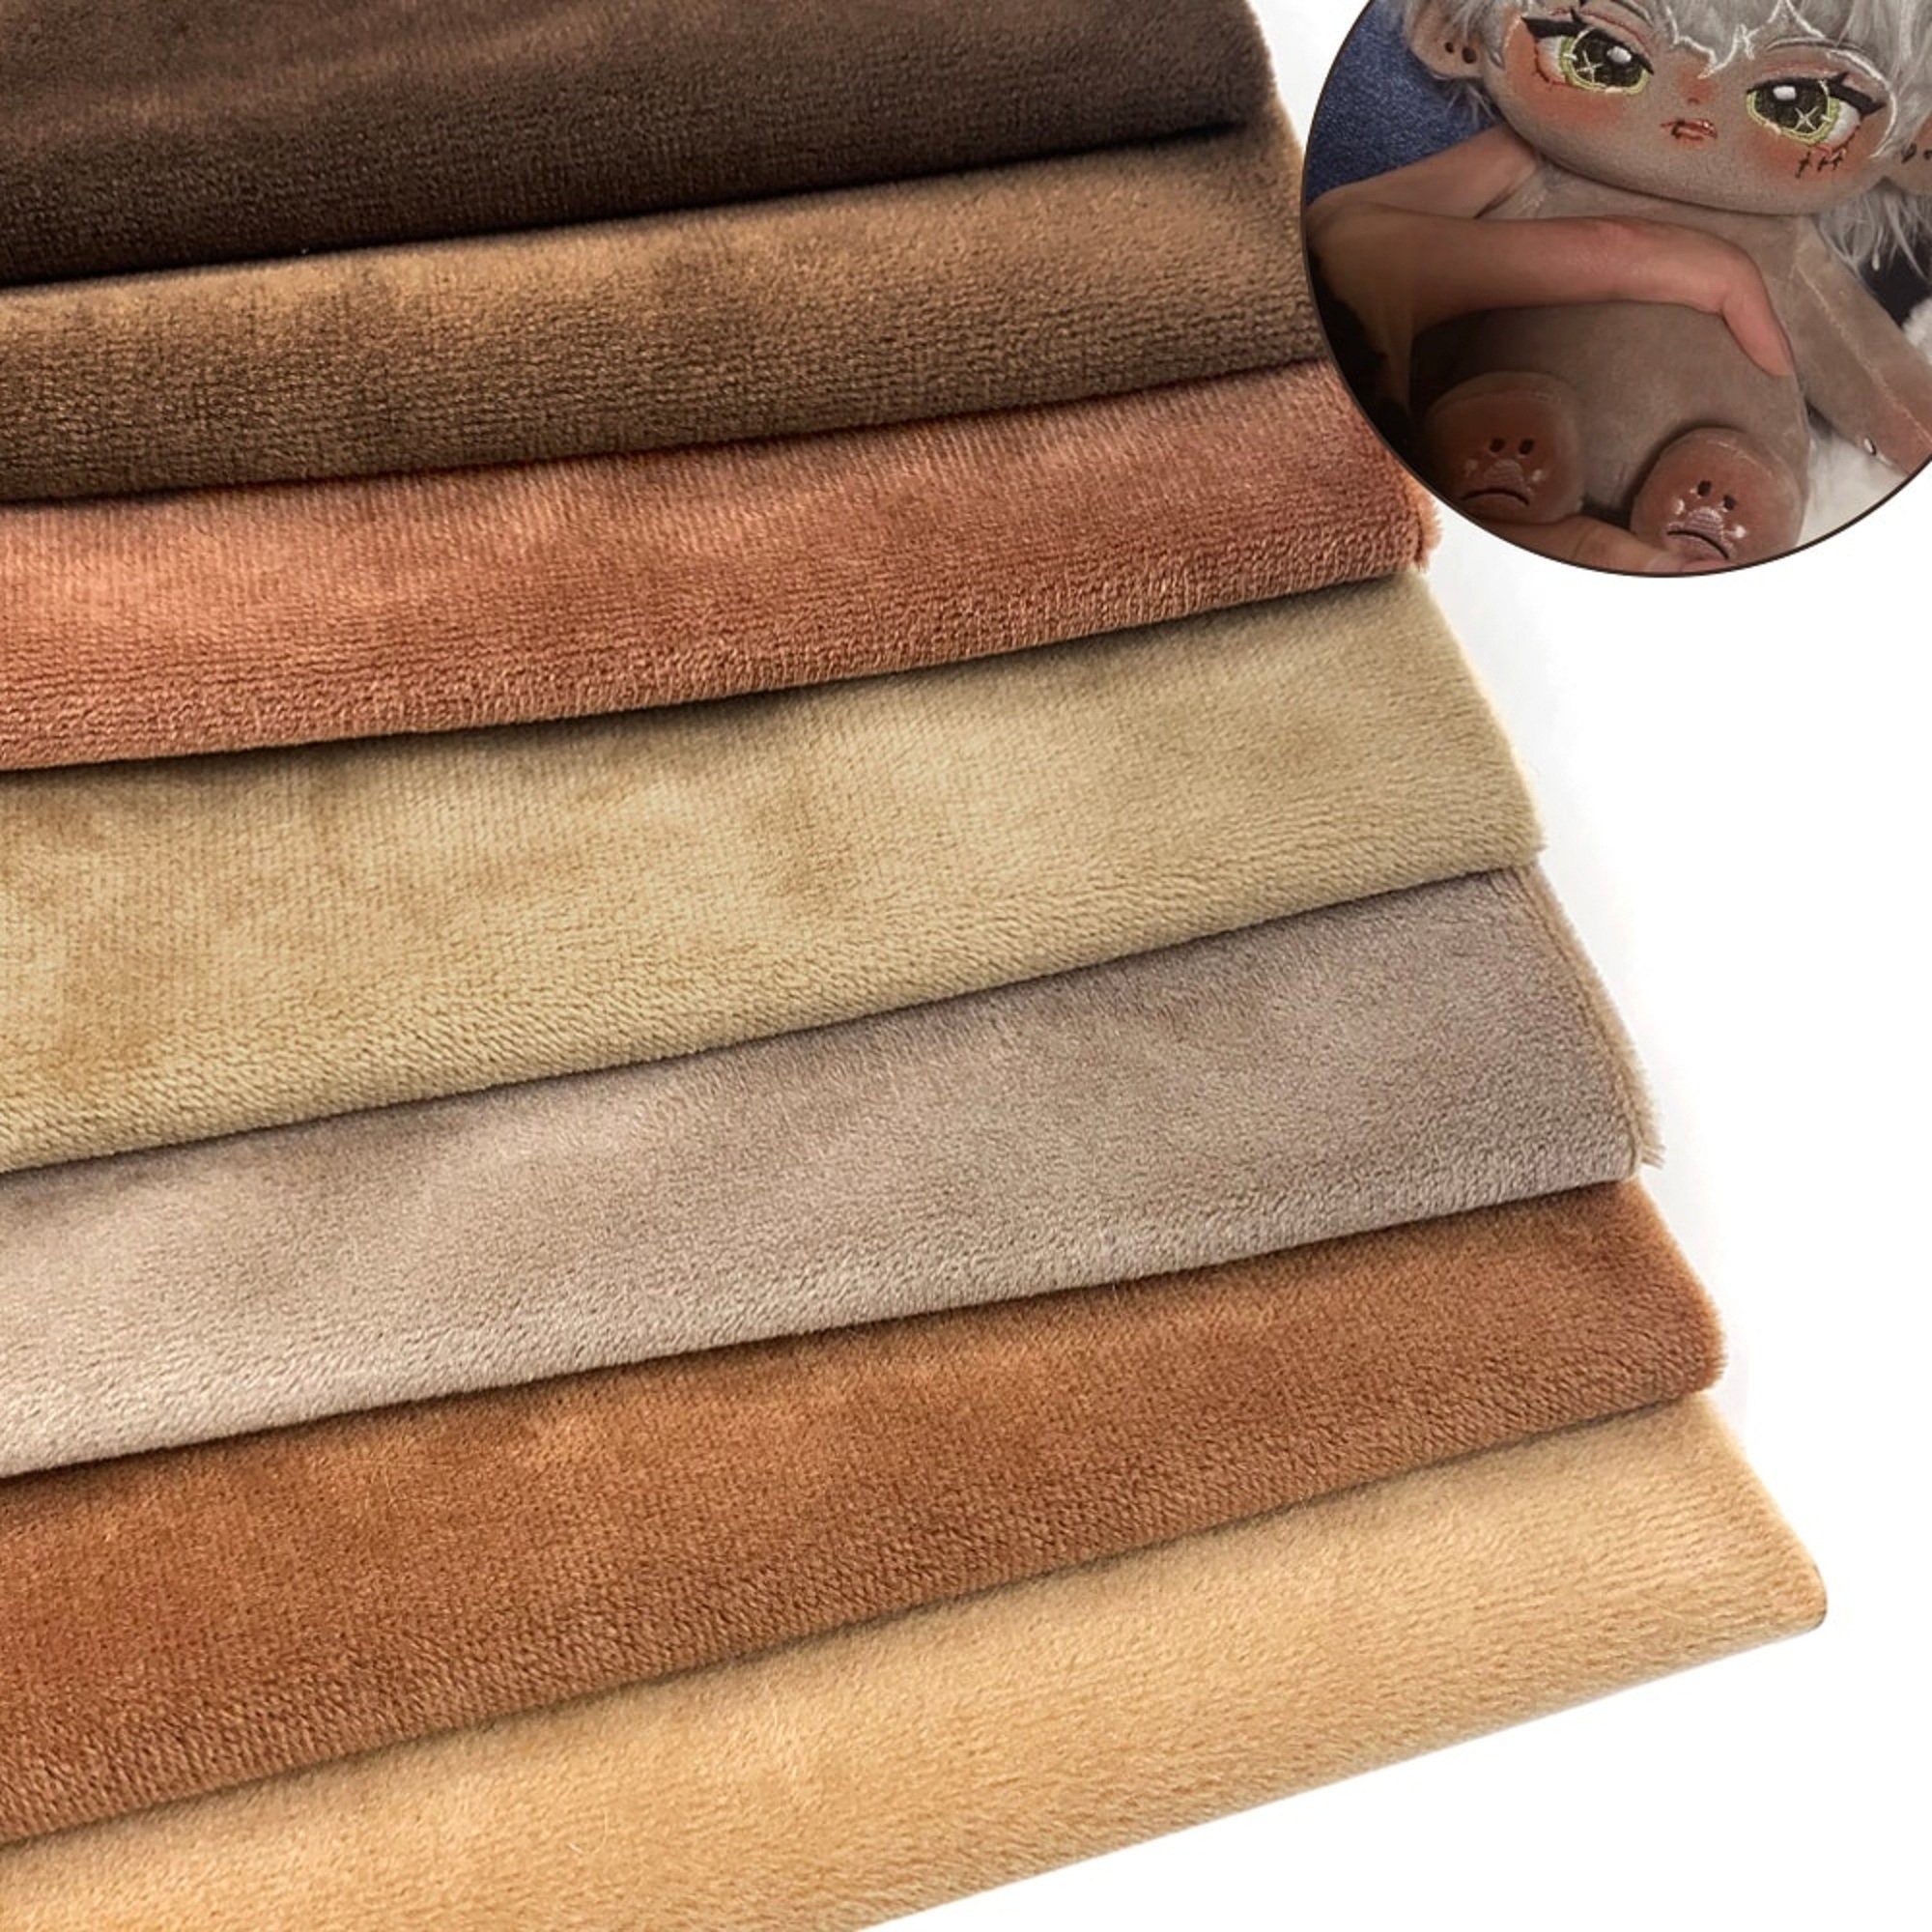 Newly Arrived 1mm Pile Length Skin Color Fabric Use For Cotton